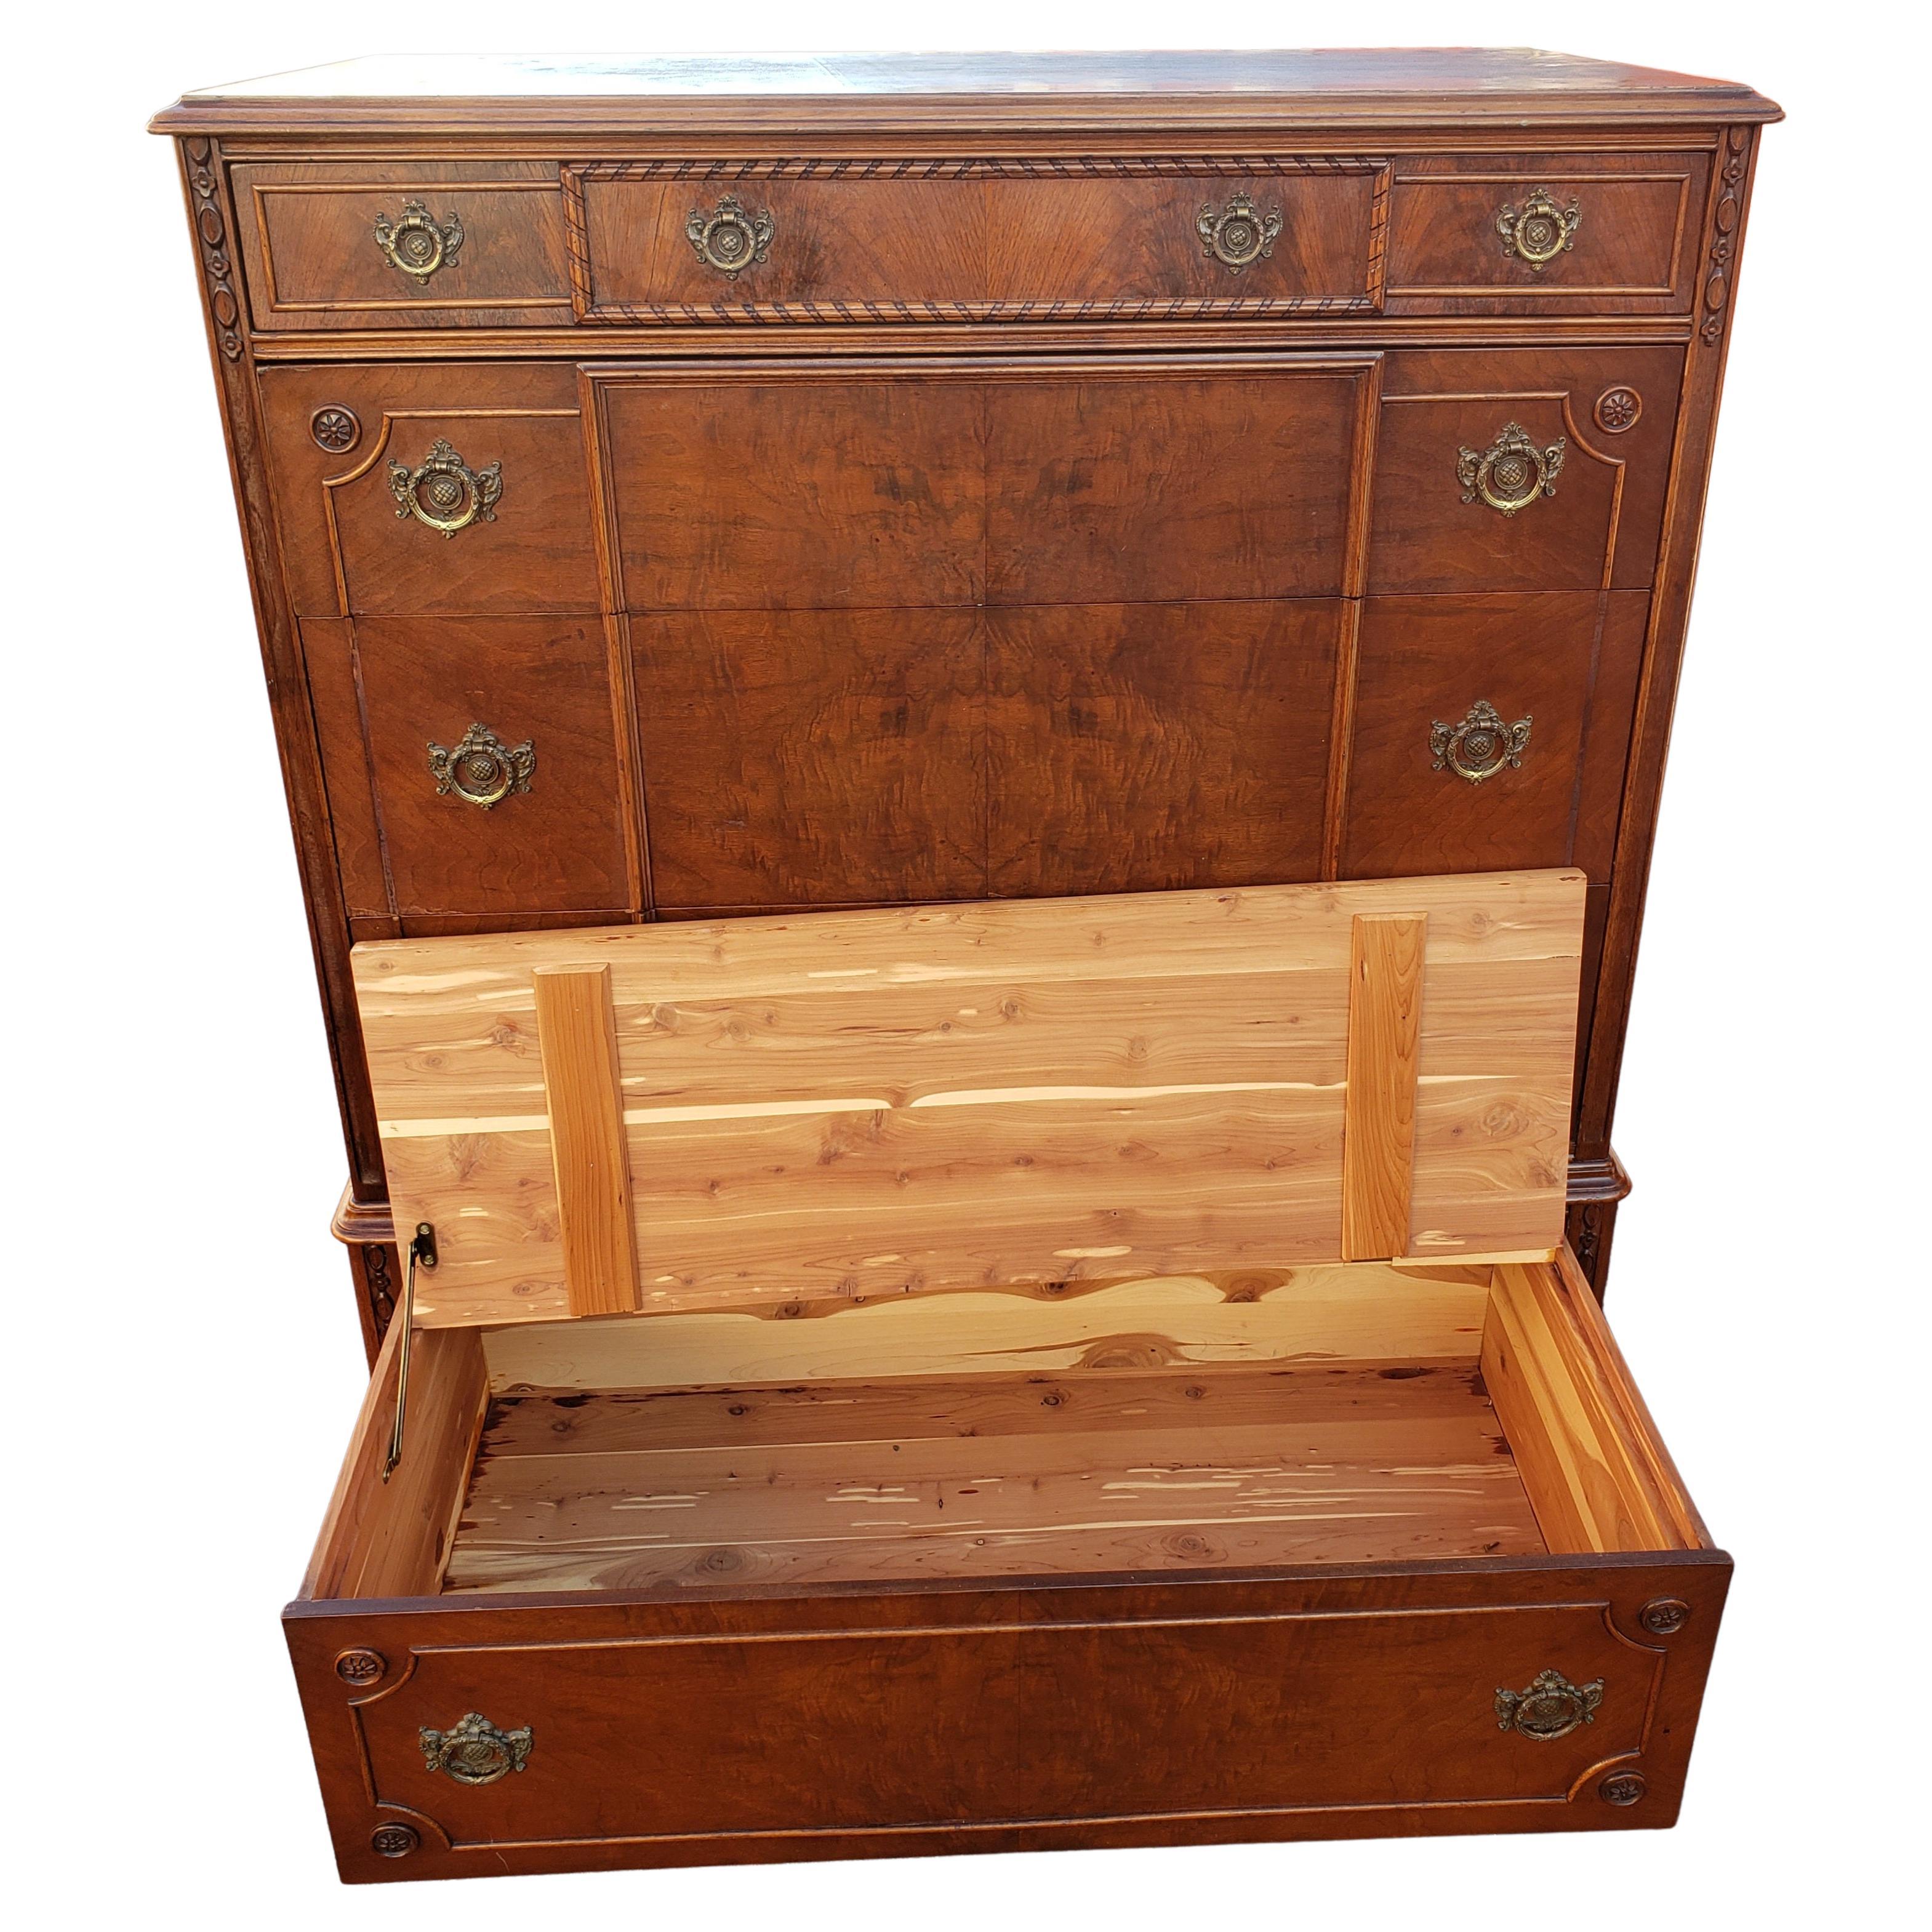 Renaissance Revival Phenix Furniture Chest of Drawers with Integrated Mirror and Cedar Lined Drawer